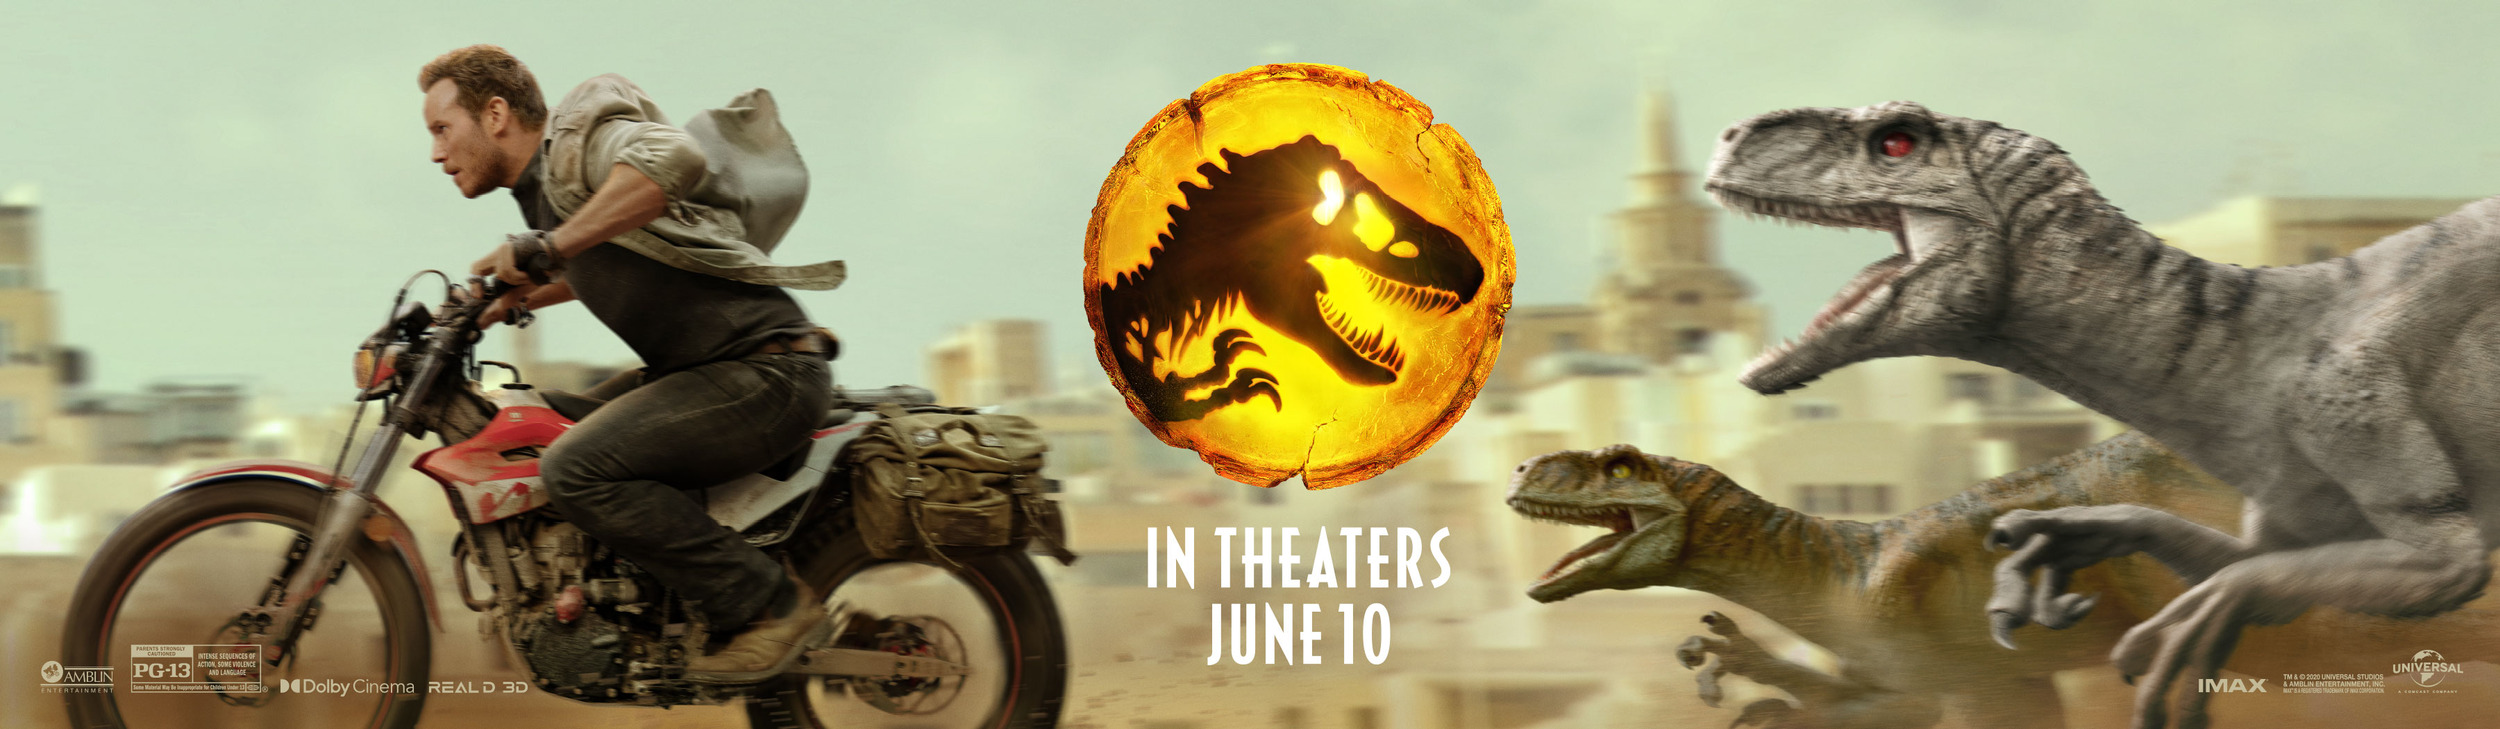 Mega Sized Movie Poster Image for Jurassic World: Dominion (#16 of 19)